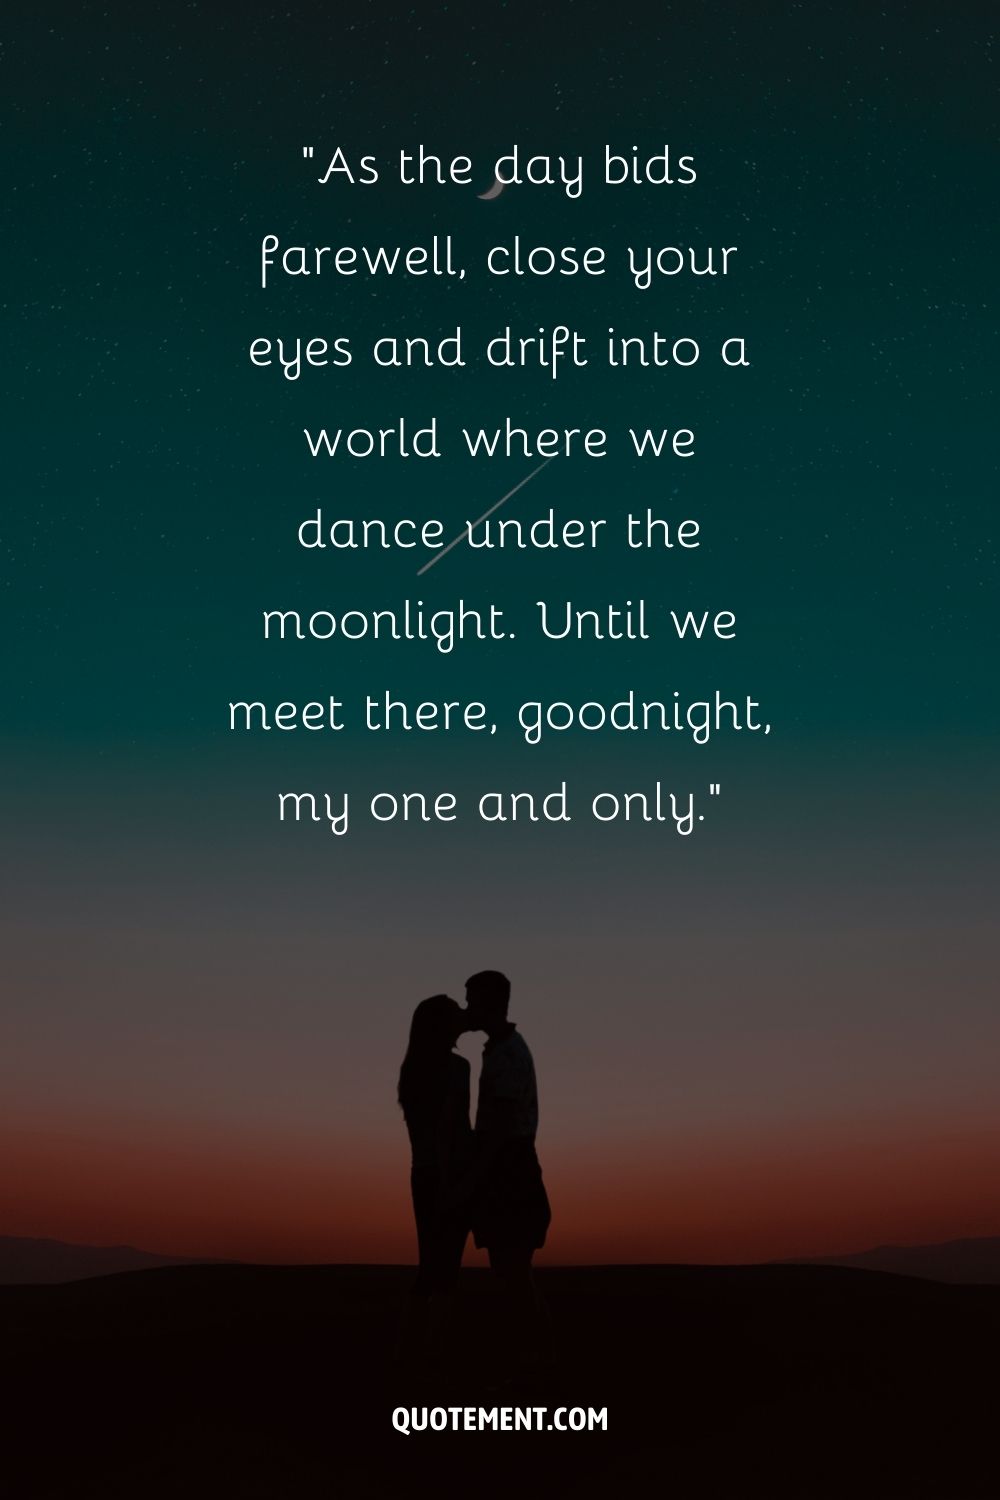 Two people in a romantic embrace with a night sky and a sliver of the moon overhead